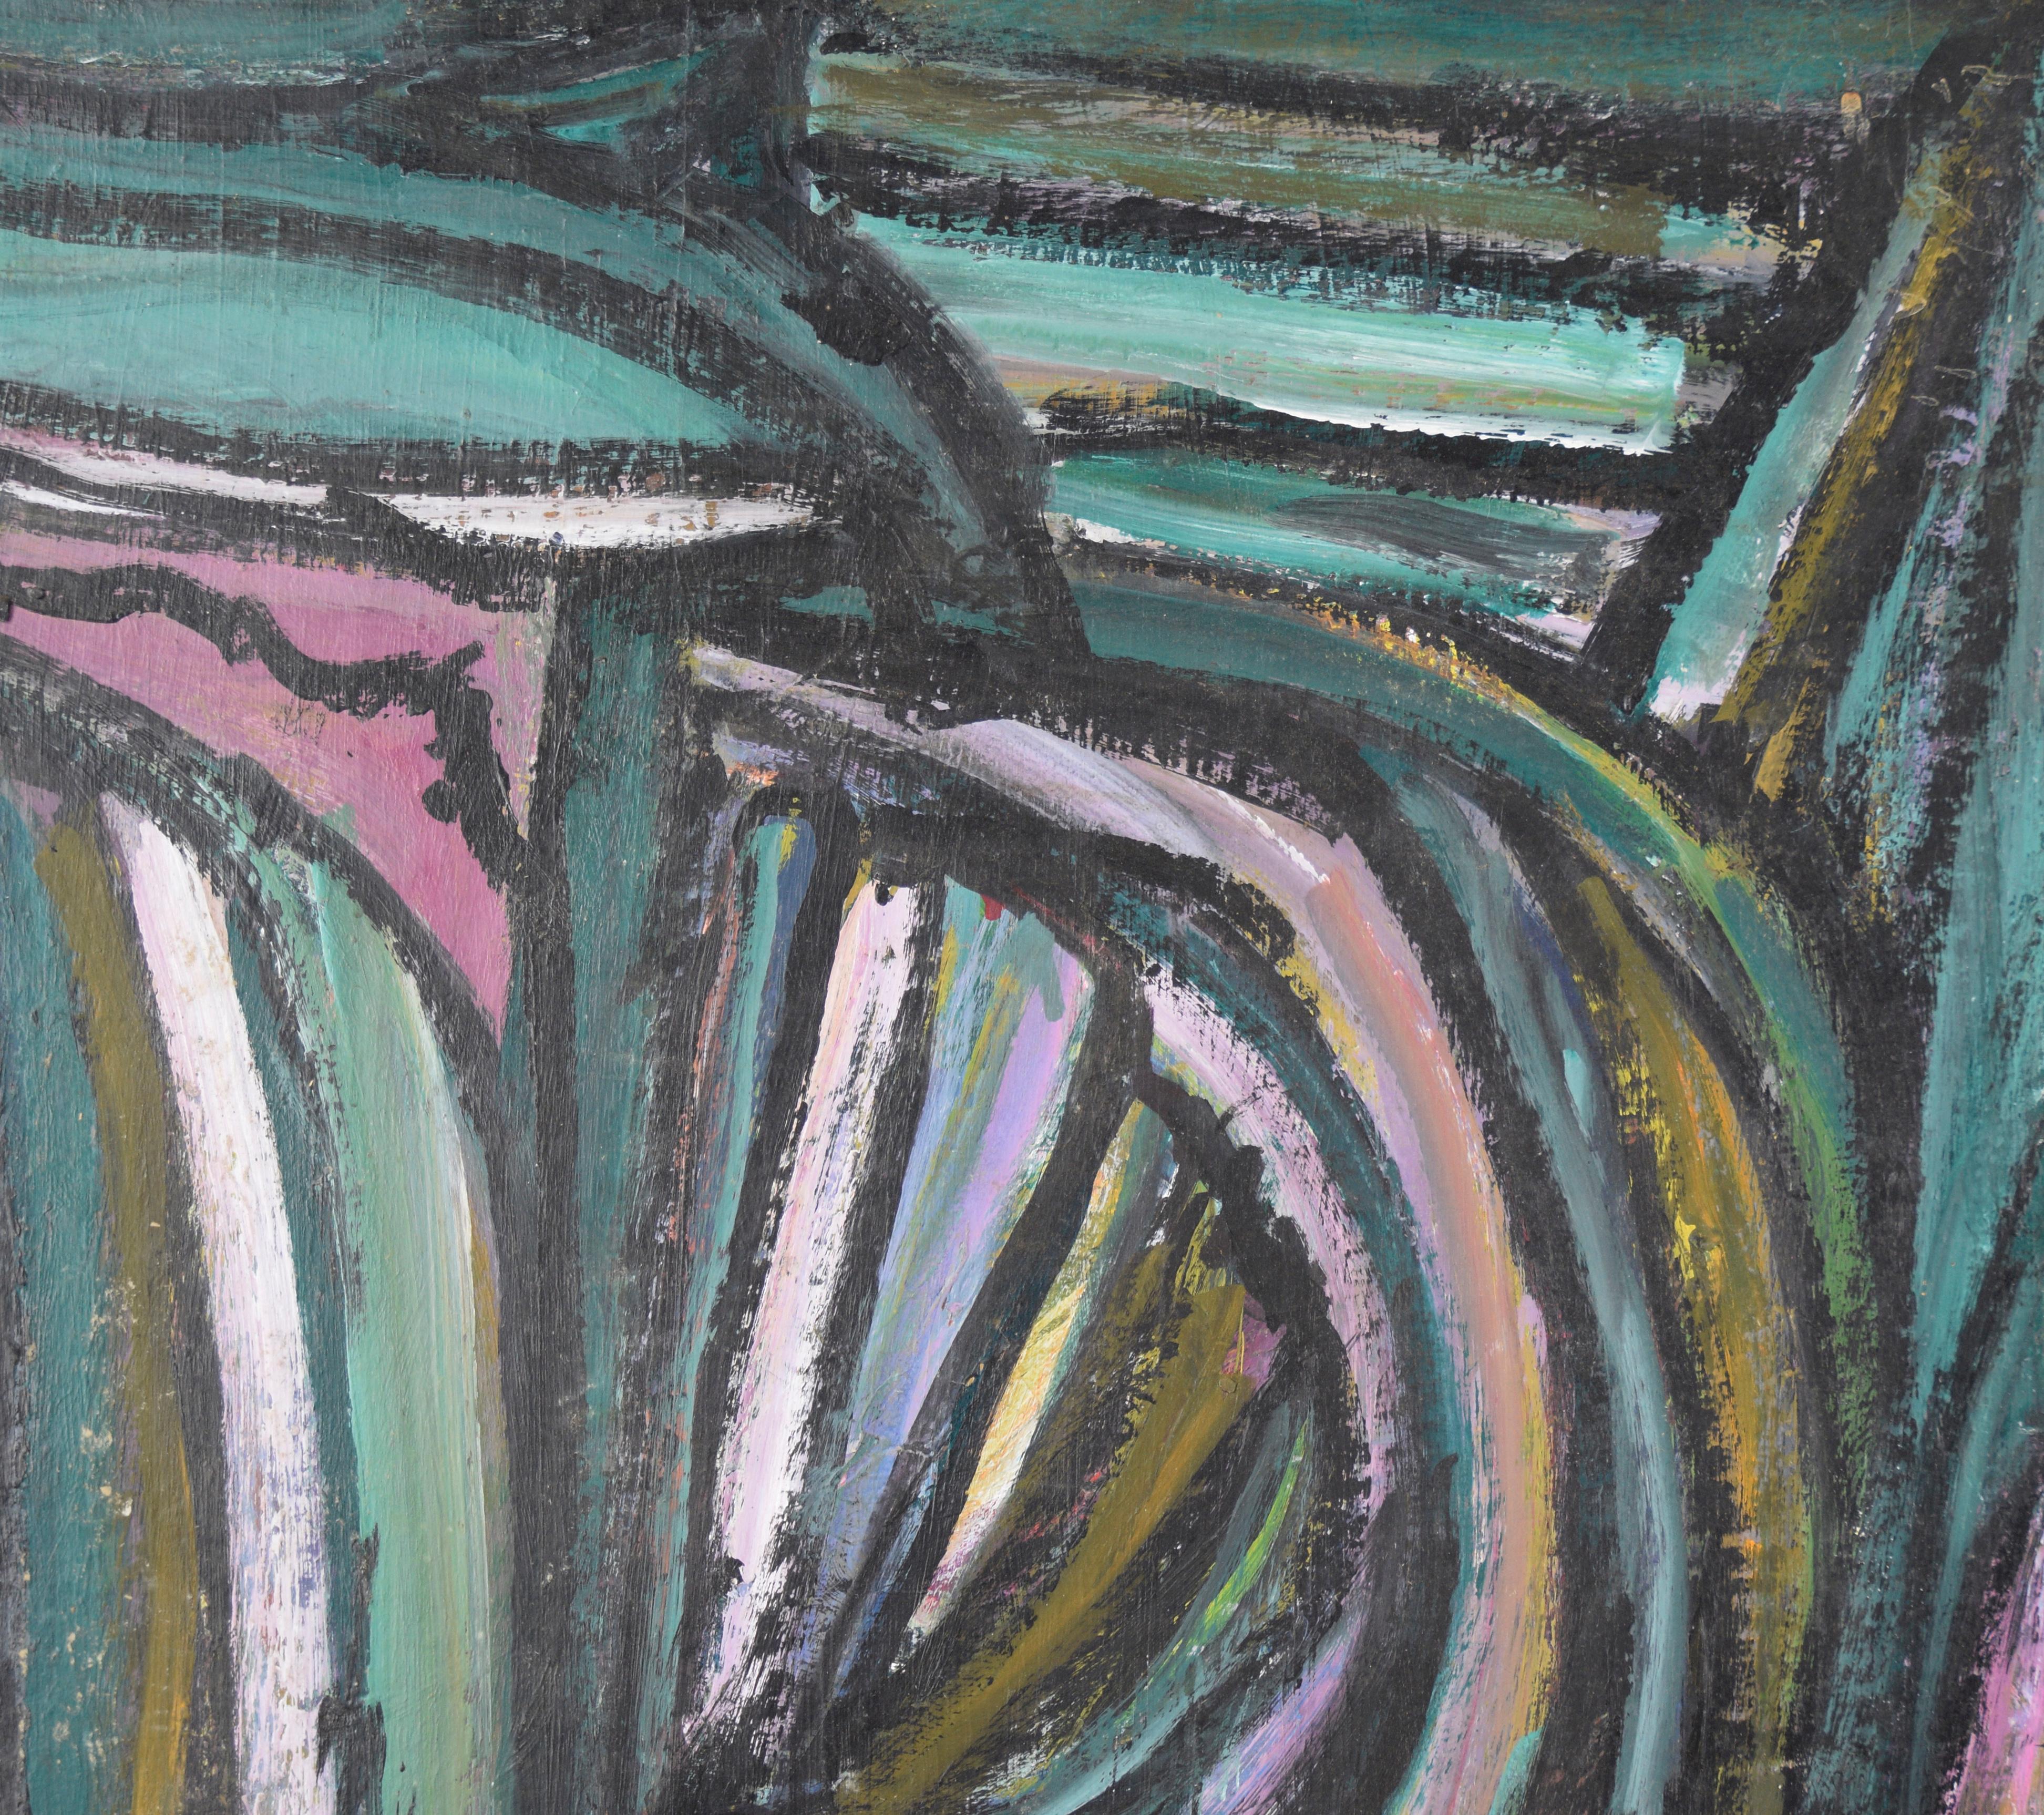 Bay Area Abstract Expressionist Composition in Oil on Cardboard

San Francisco Bay area abstract expressionist composition by Honora Berg (American, 1897-1985). Bold linear abstract composition in magenta, teal, and black. The piece is mostly